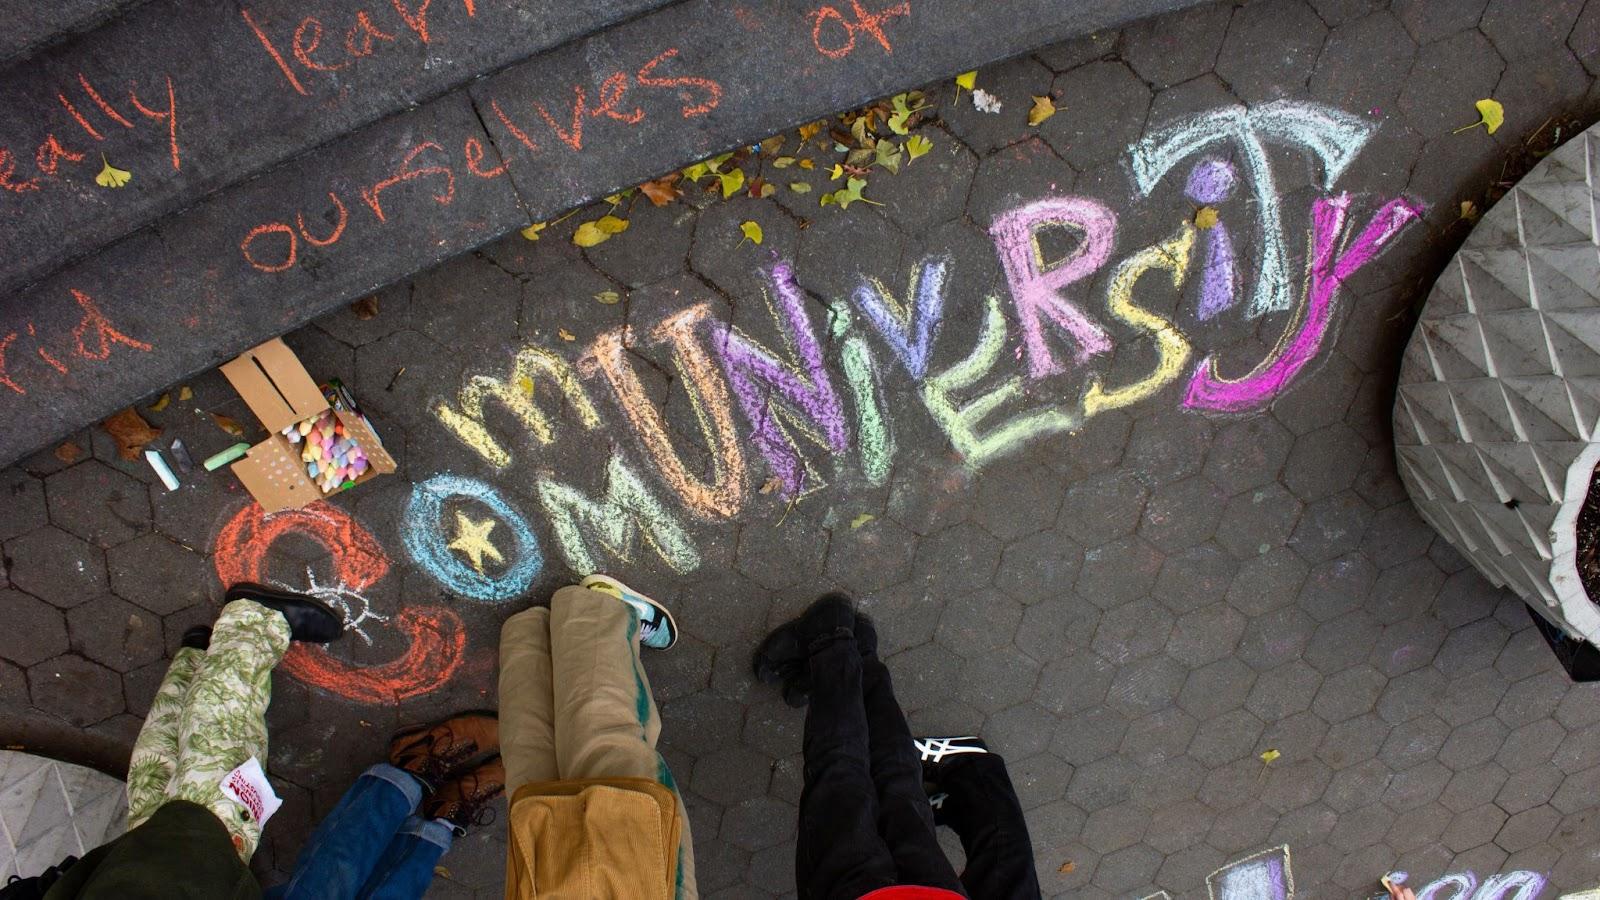 “Communiversity” written in bold letters in colorful chalk on cobblestone. A box of chalk is next to the writing, and a group of people are standing. Only their legs are visible.